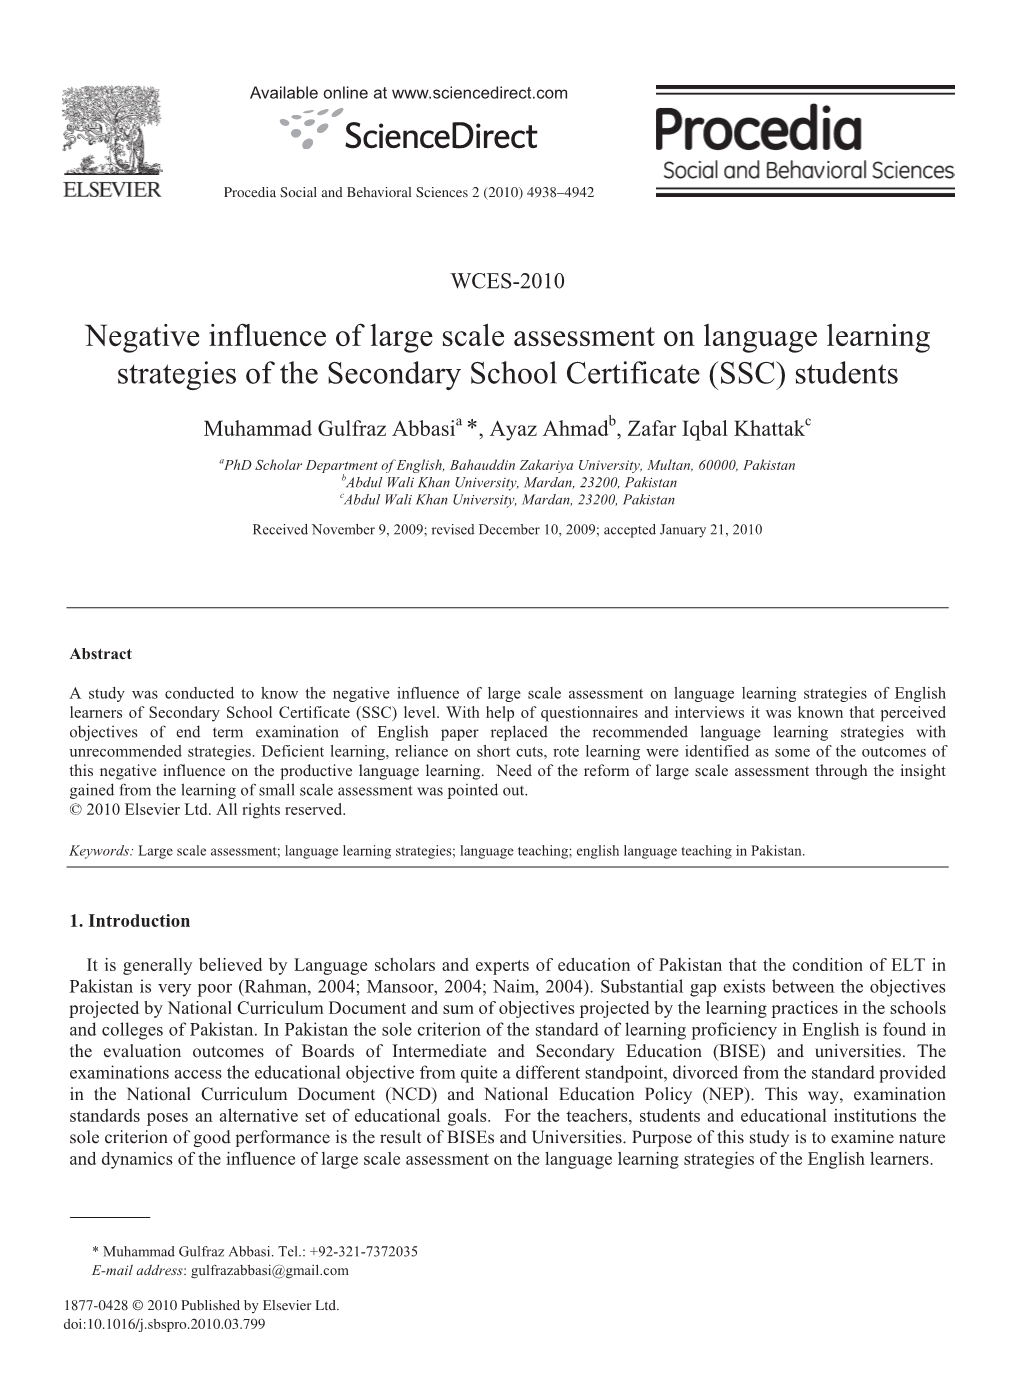 Negative Influence of Large Scale Assessment on Language Learning Strategies of the Secondary School Certificate (SSC) Students